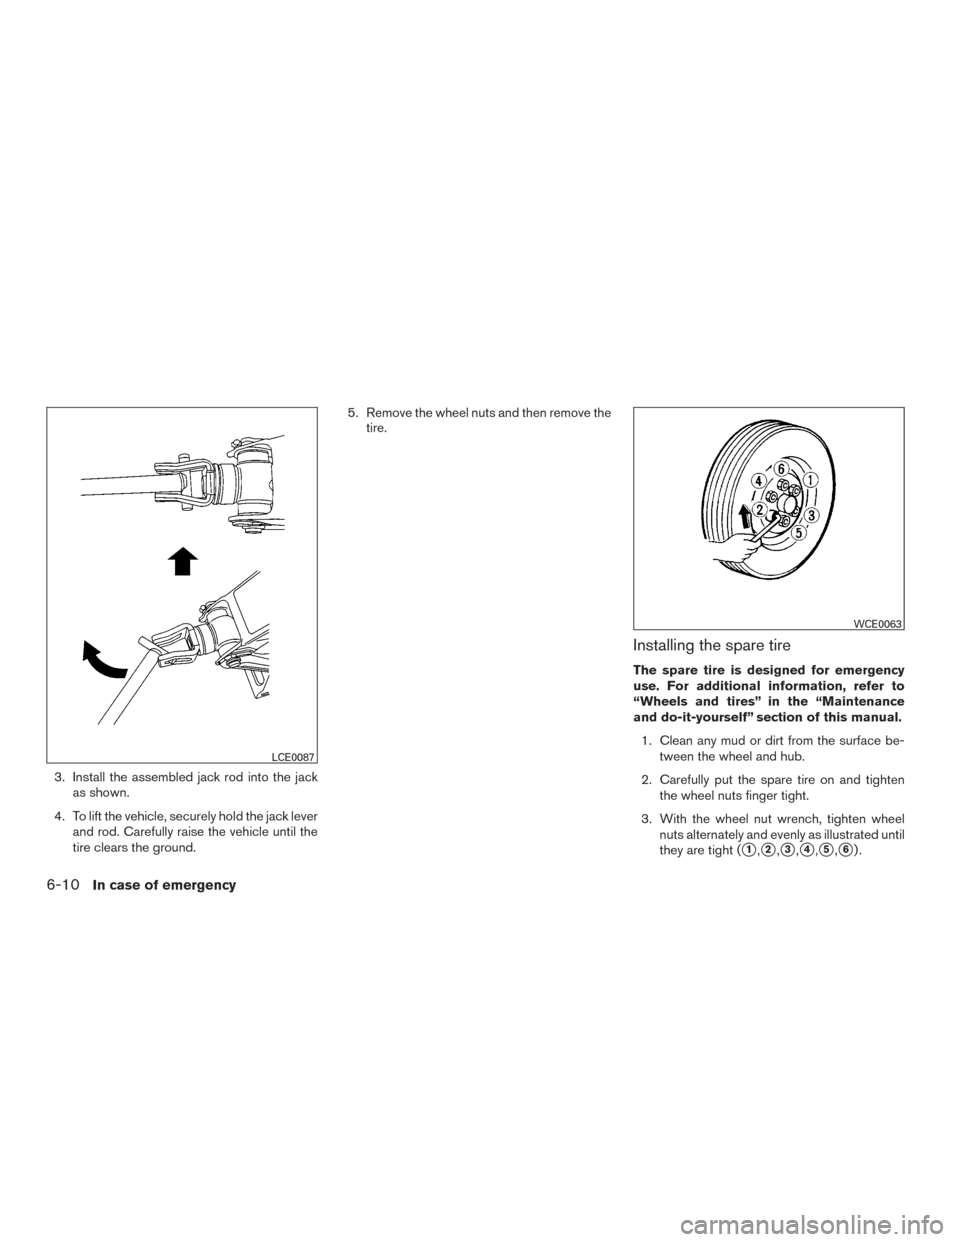 NISSAN FRONTIER 2015 D23 / 3.G Manual PDF 3. Install the assembled jack rod into the jackas shown.
4. To lift the vehicle, securely hold the jack lever and rod. Carefully raise the vehicle until the
tire clears the ground. 5. Remove the wheel